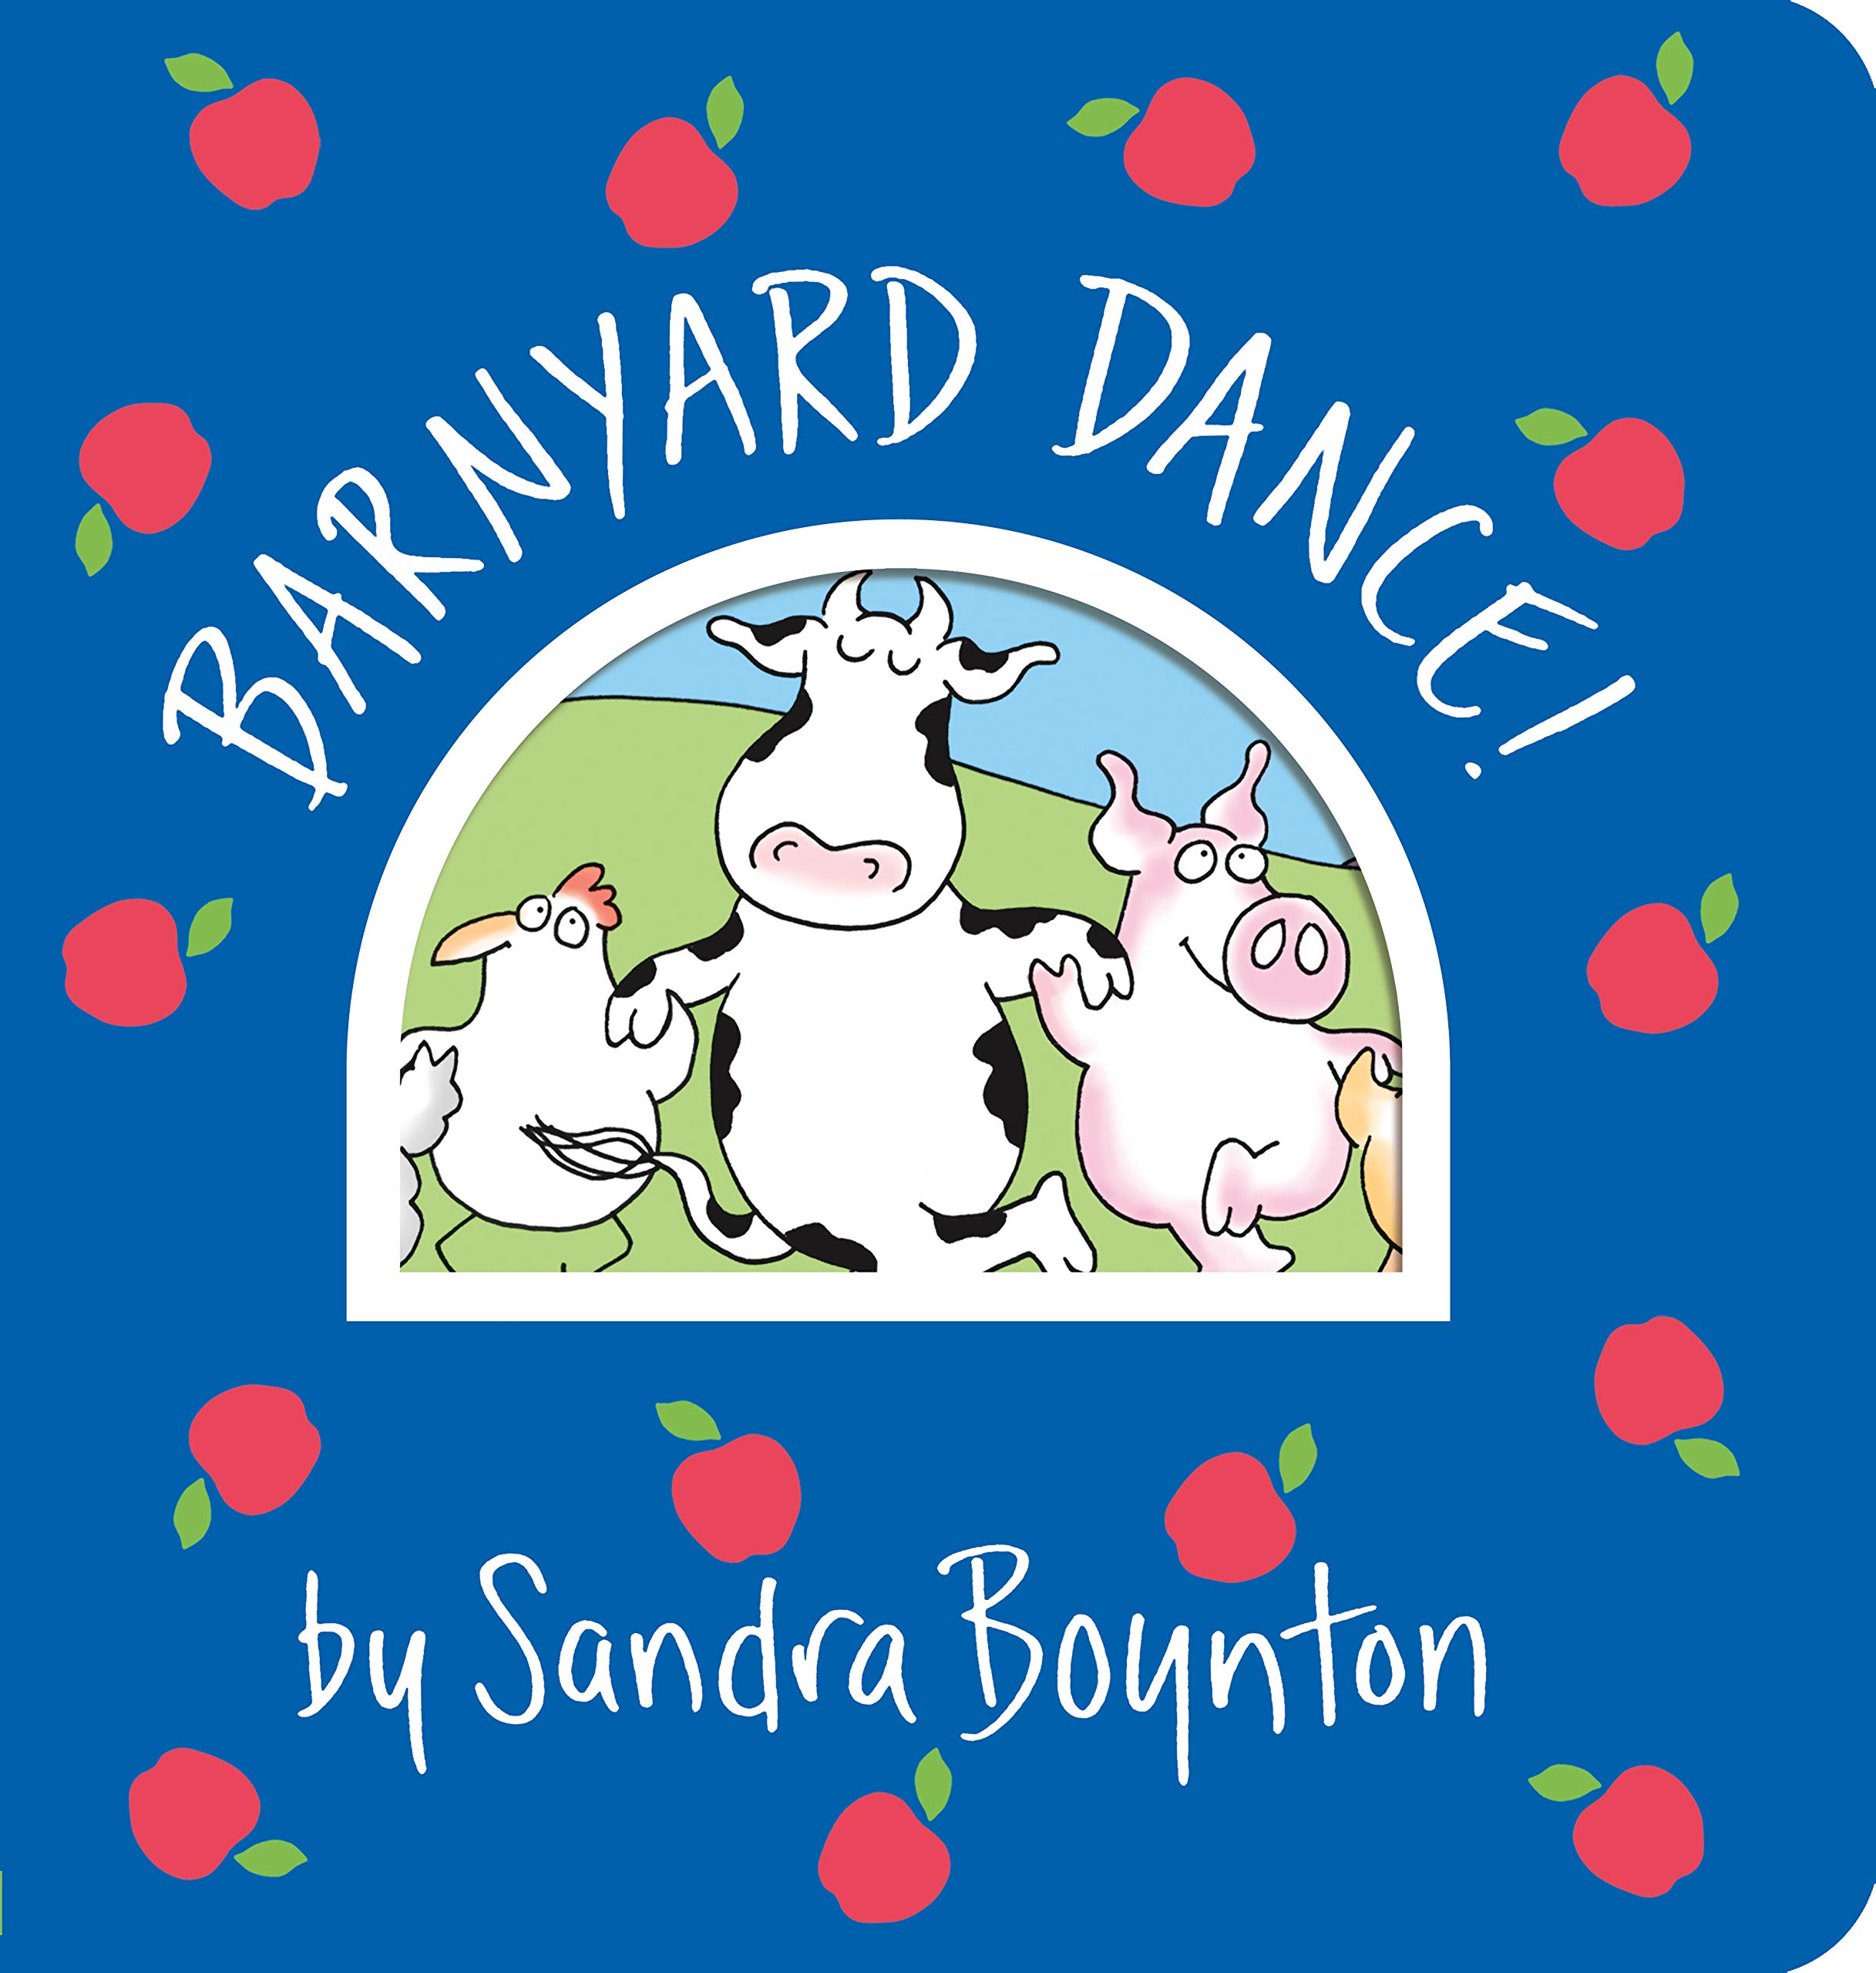 speech and language teaching concepts for Barn Yard Dance in speech therapy​ ​